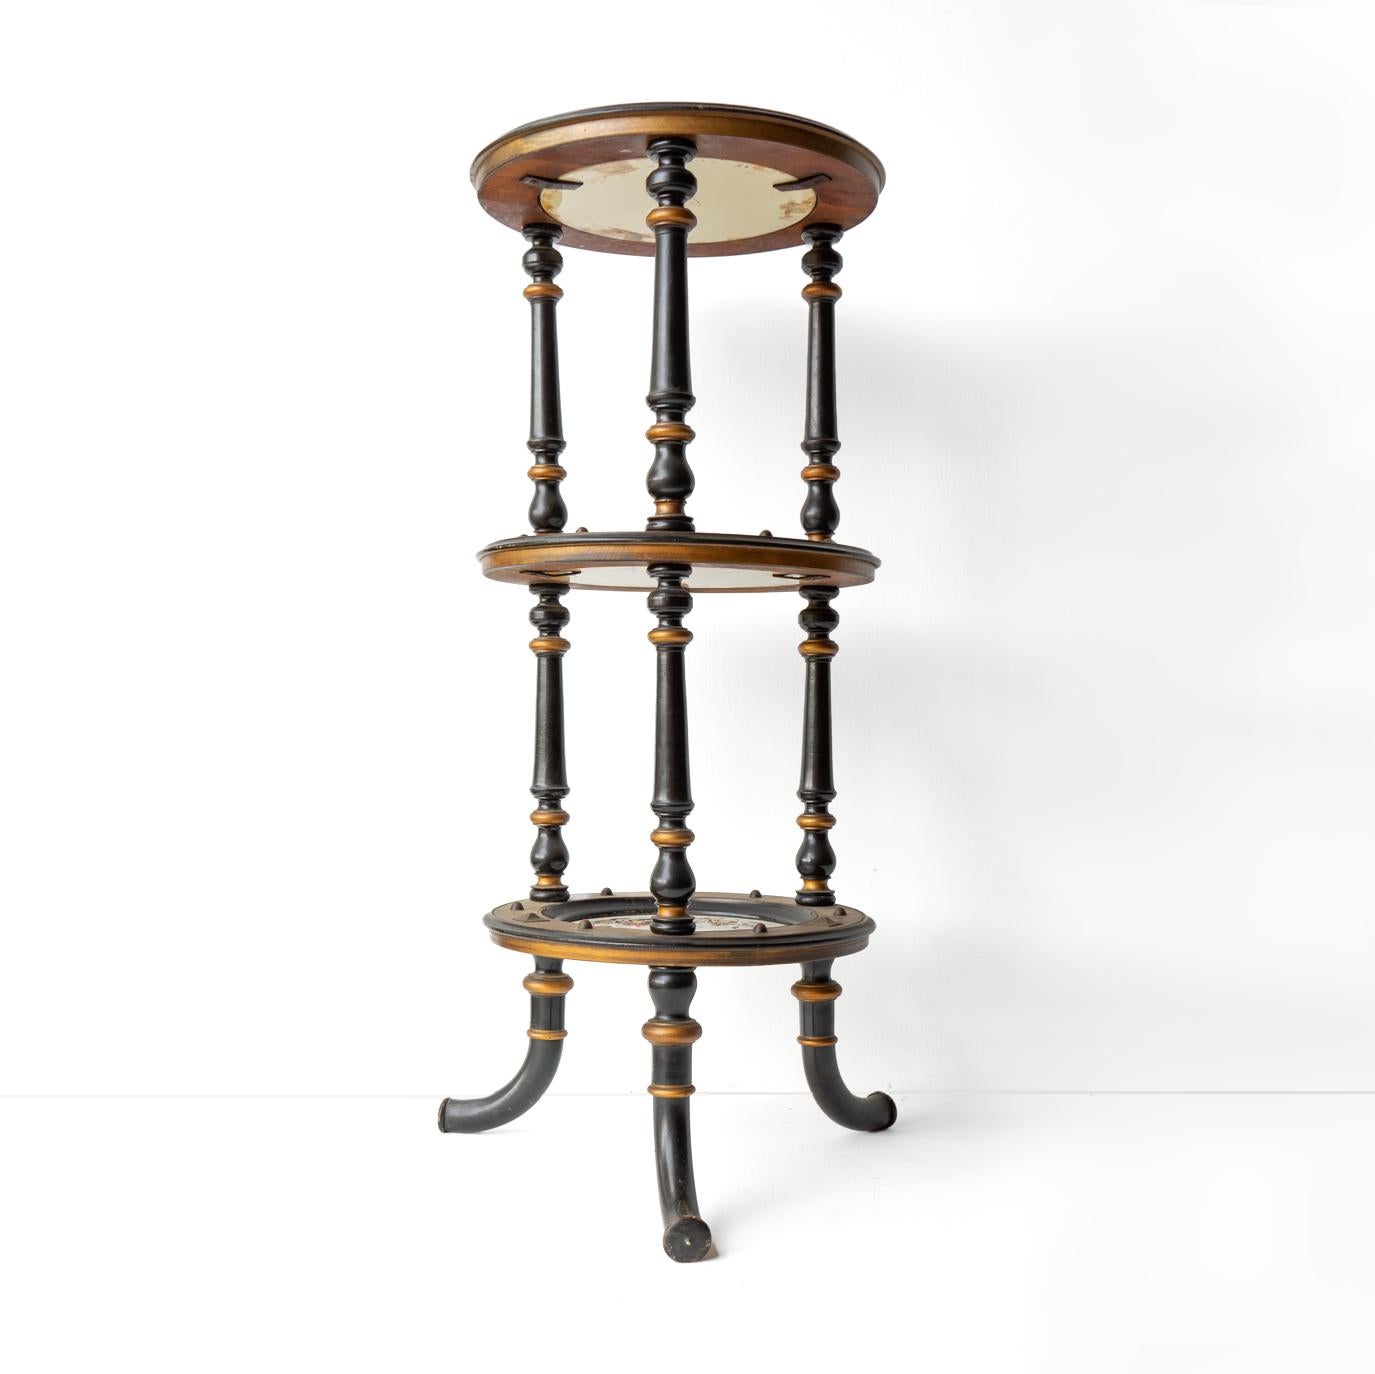 Porcelain Aesthetic Movement Three Tiered Cake Stand, 19th Century Victorian cake display For Sale